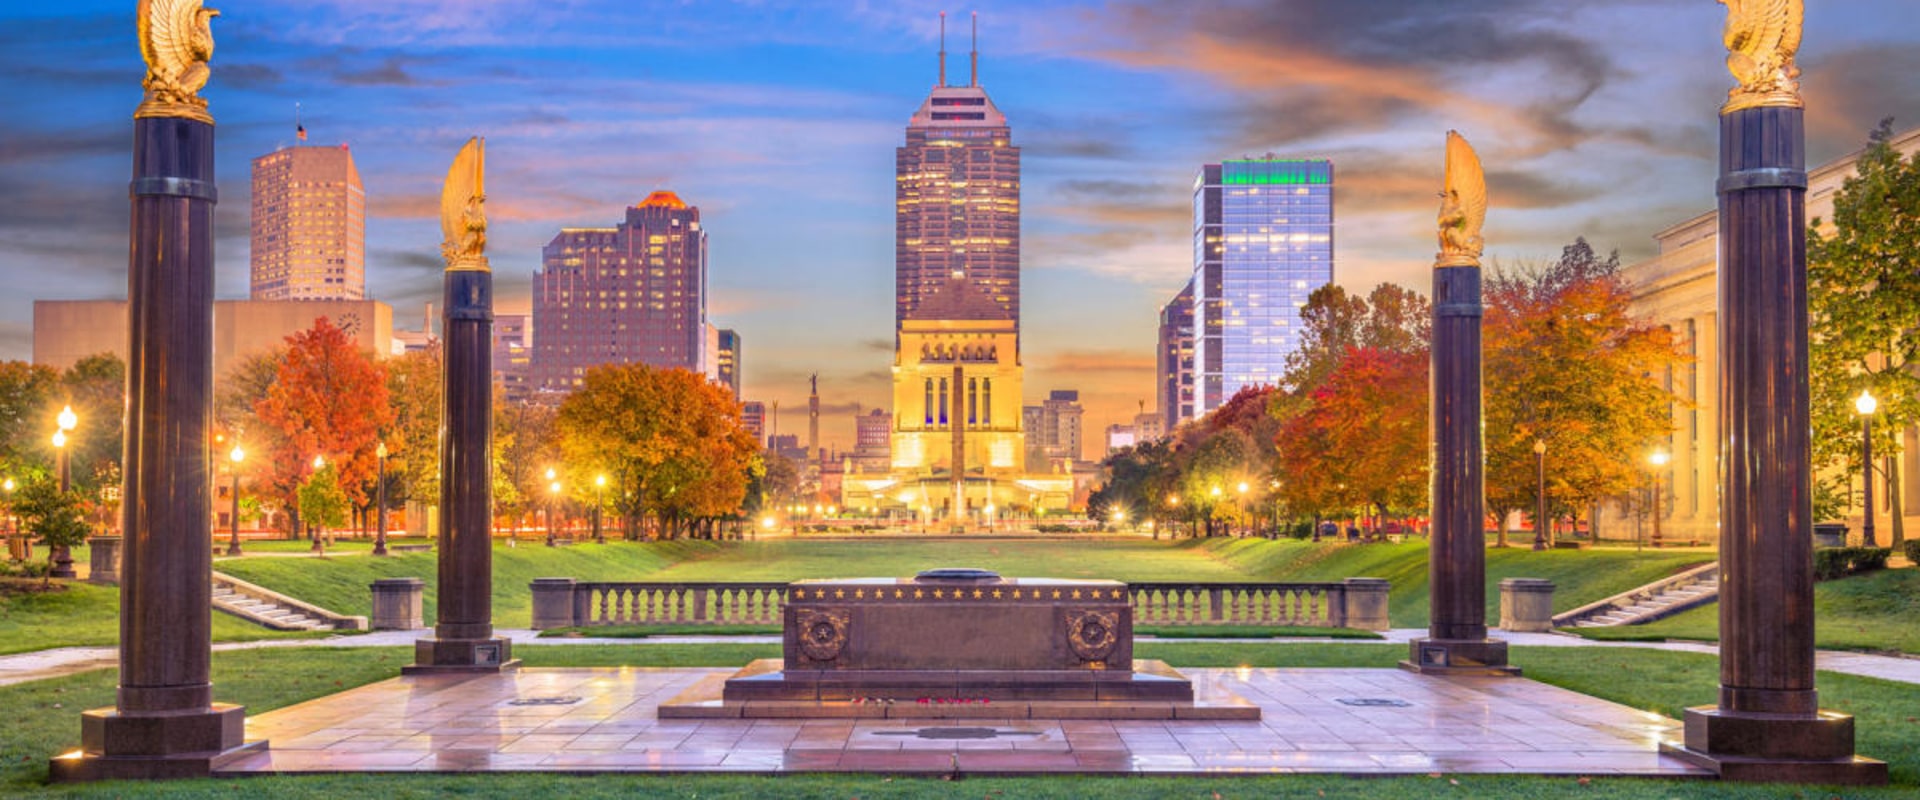 The Fascinating and Rich History of Indianapolis